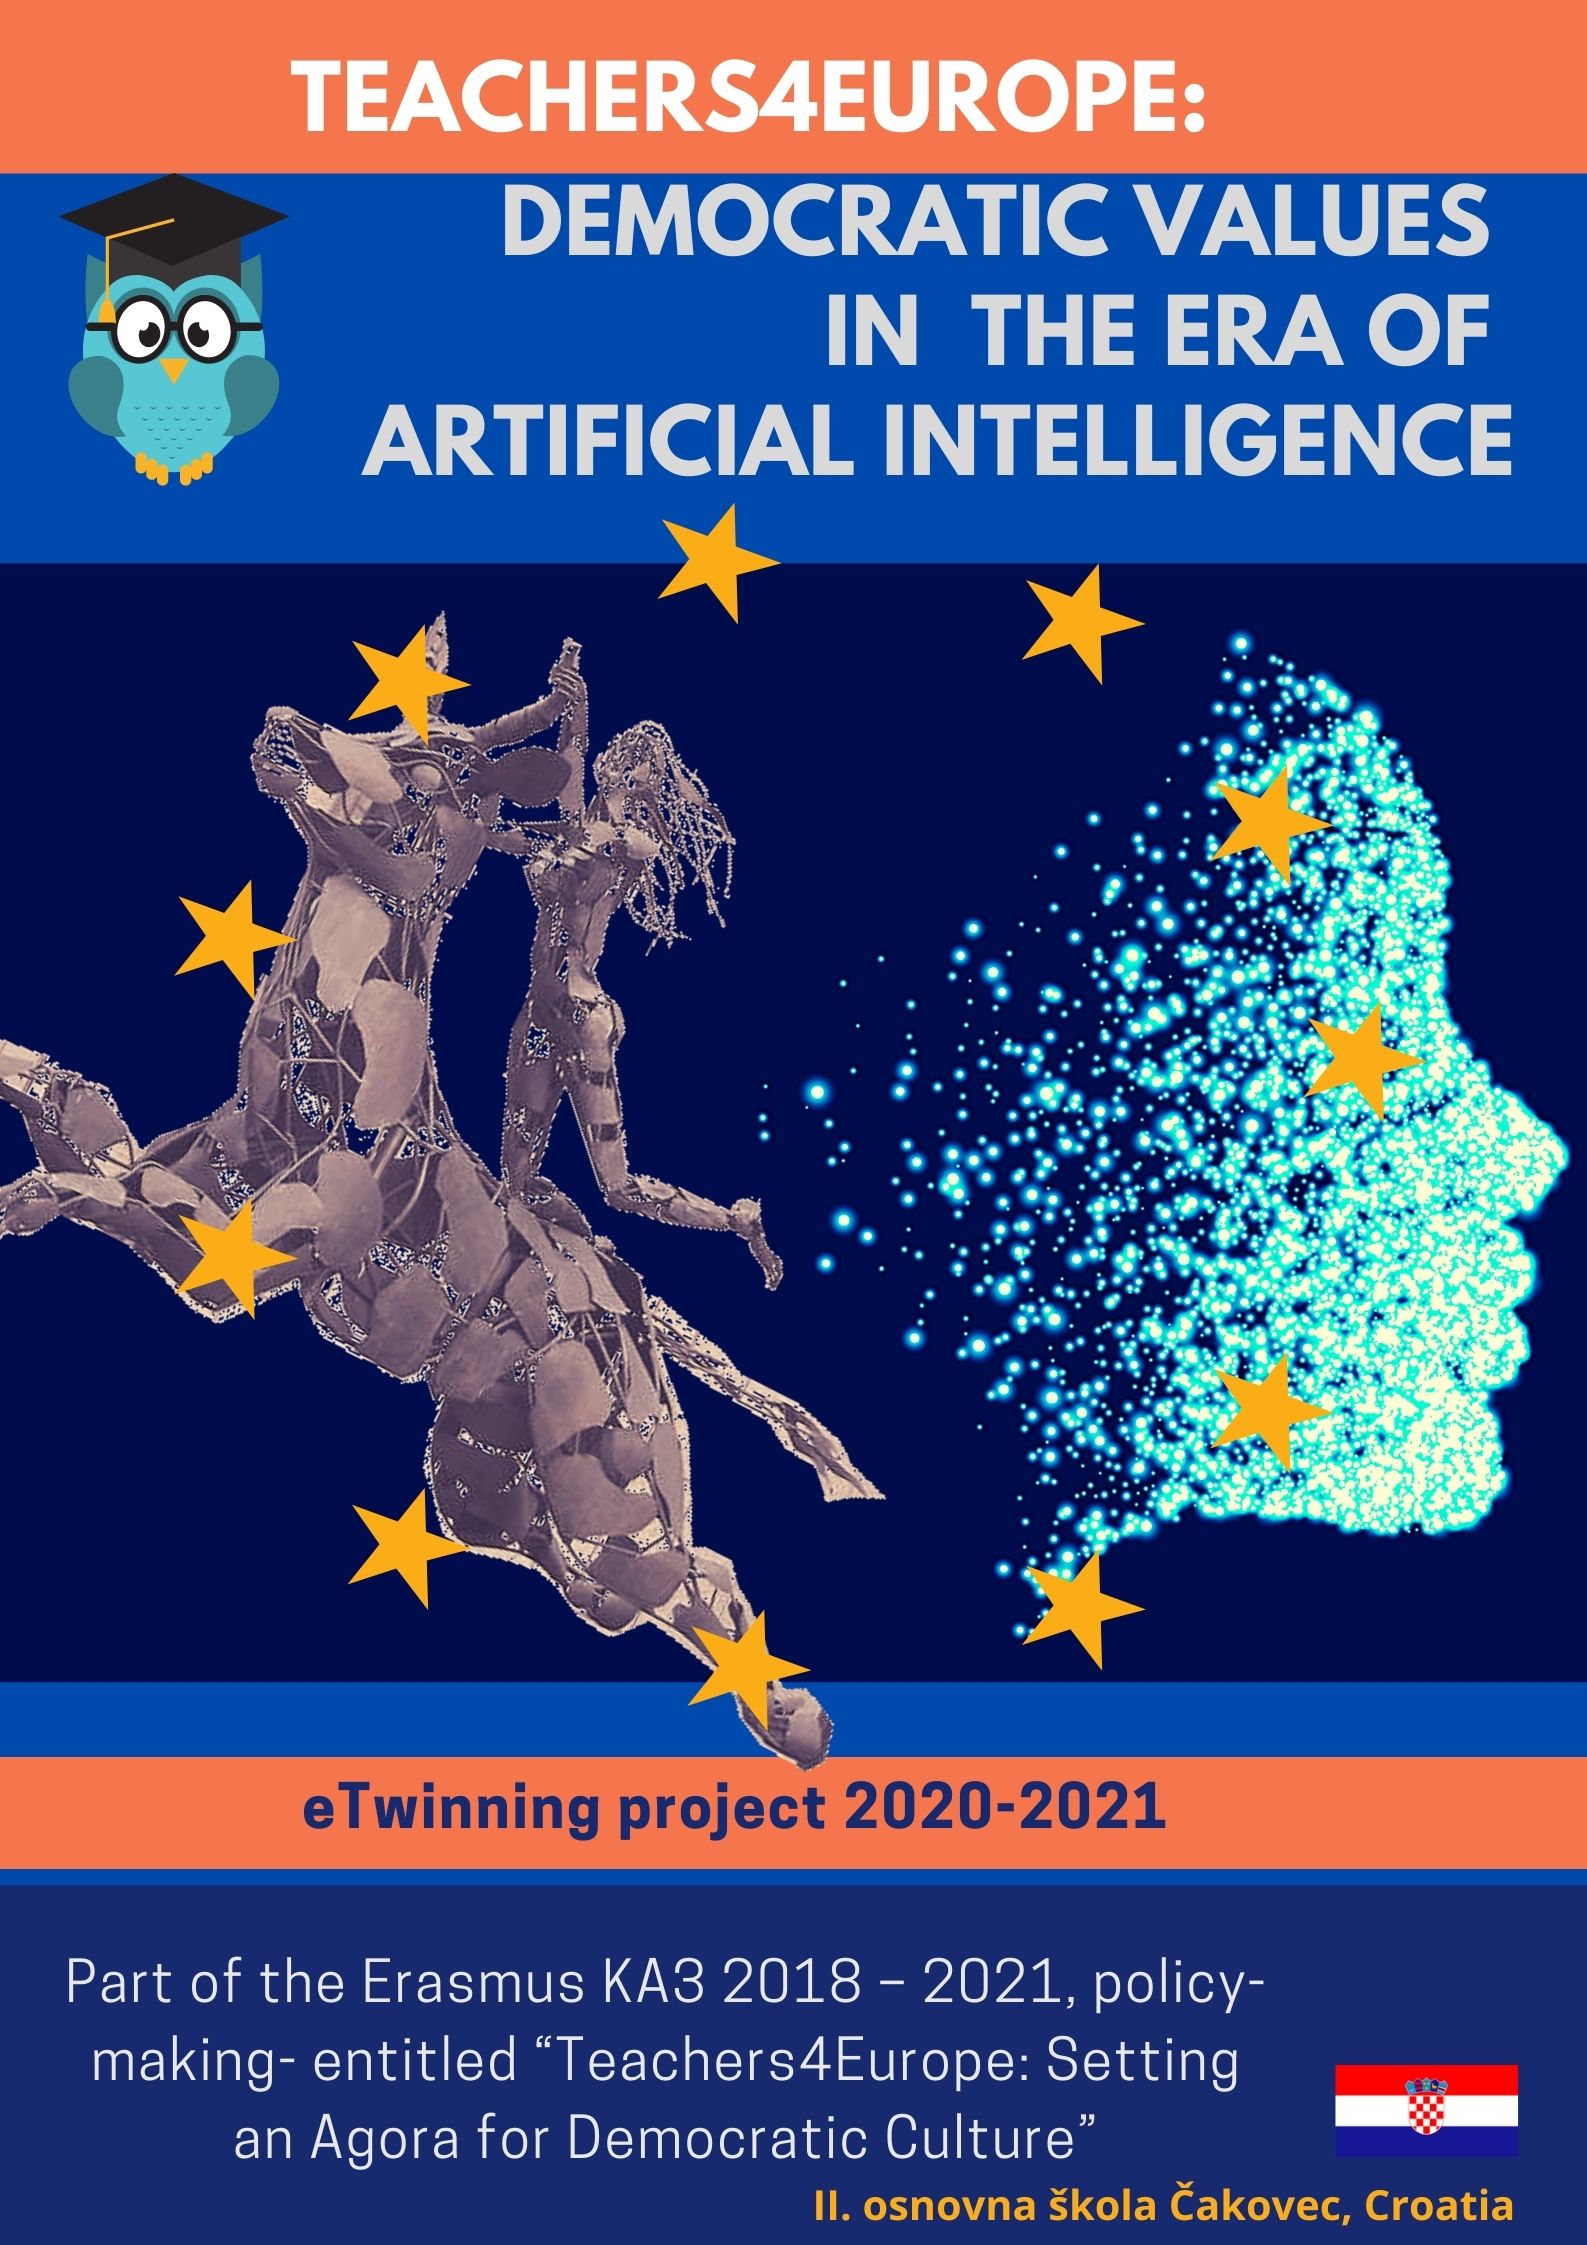 TEACHERS4EUROPE: DEMOCRATIC VALUES IN THE ERA OF ARTIFICIAL INTELLIGENCE